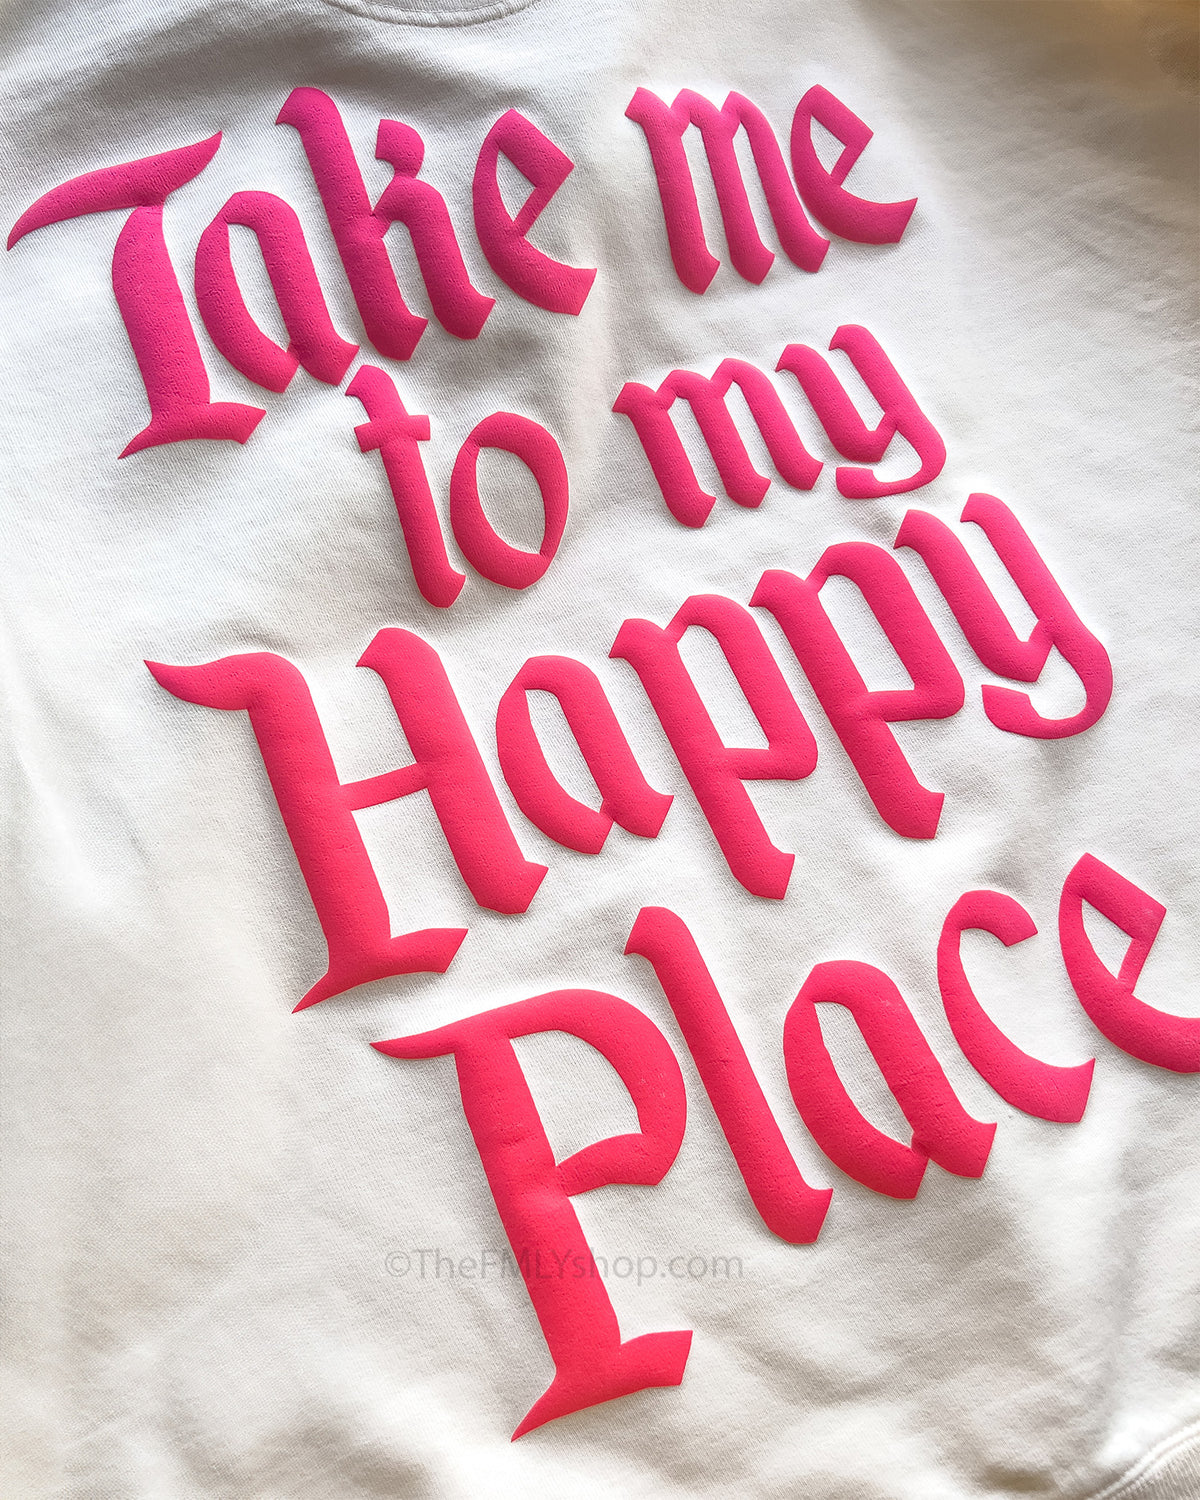 *Limited Item* Take Me to My Happy Place Sweatshirt